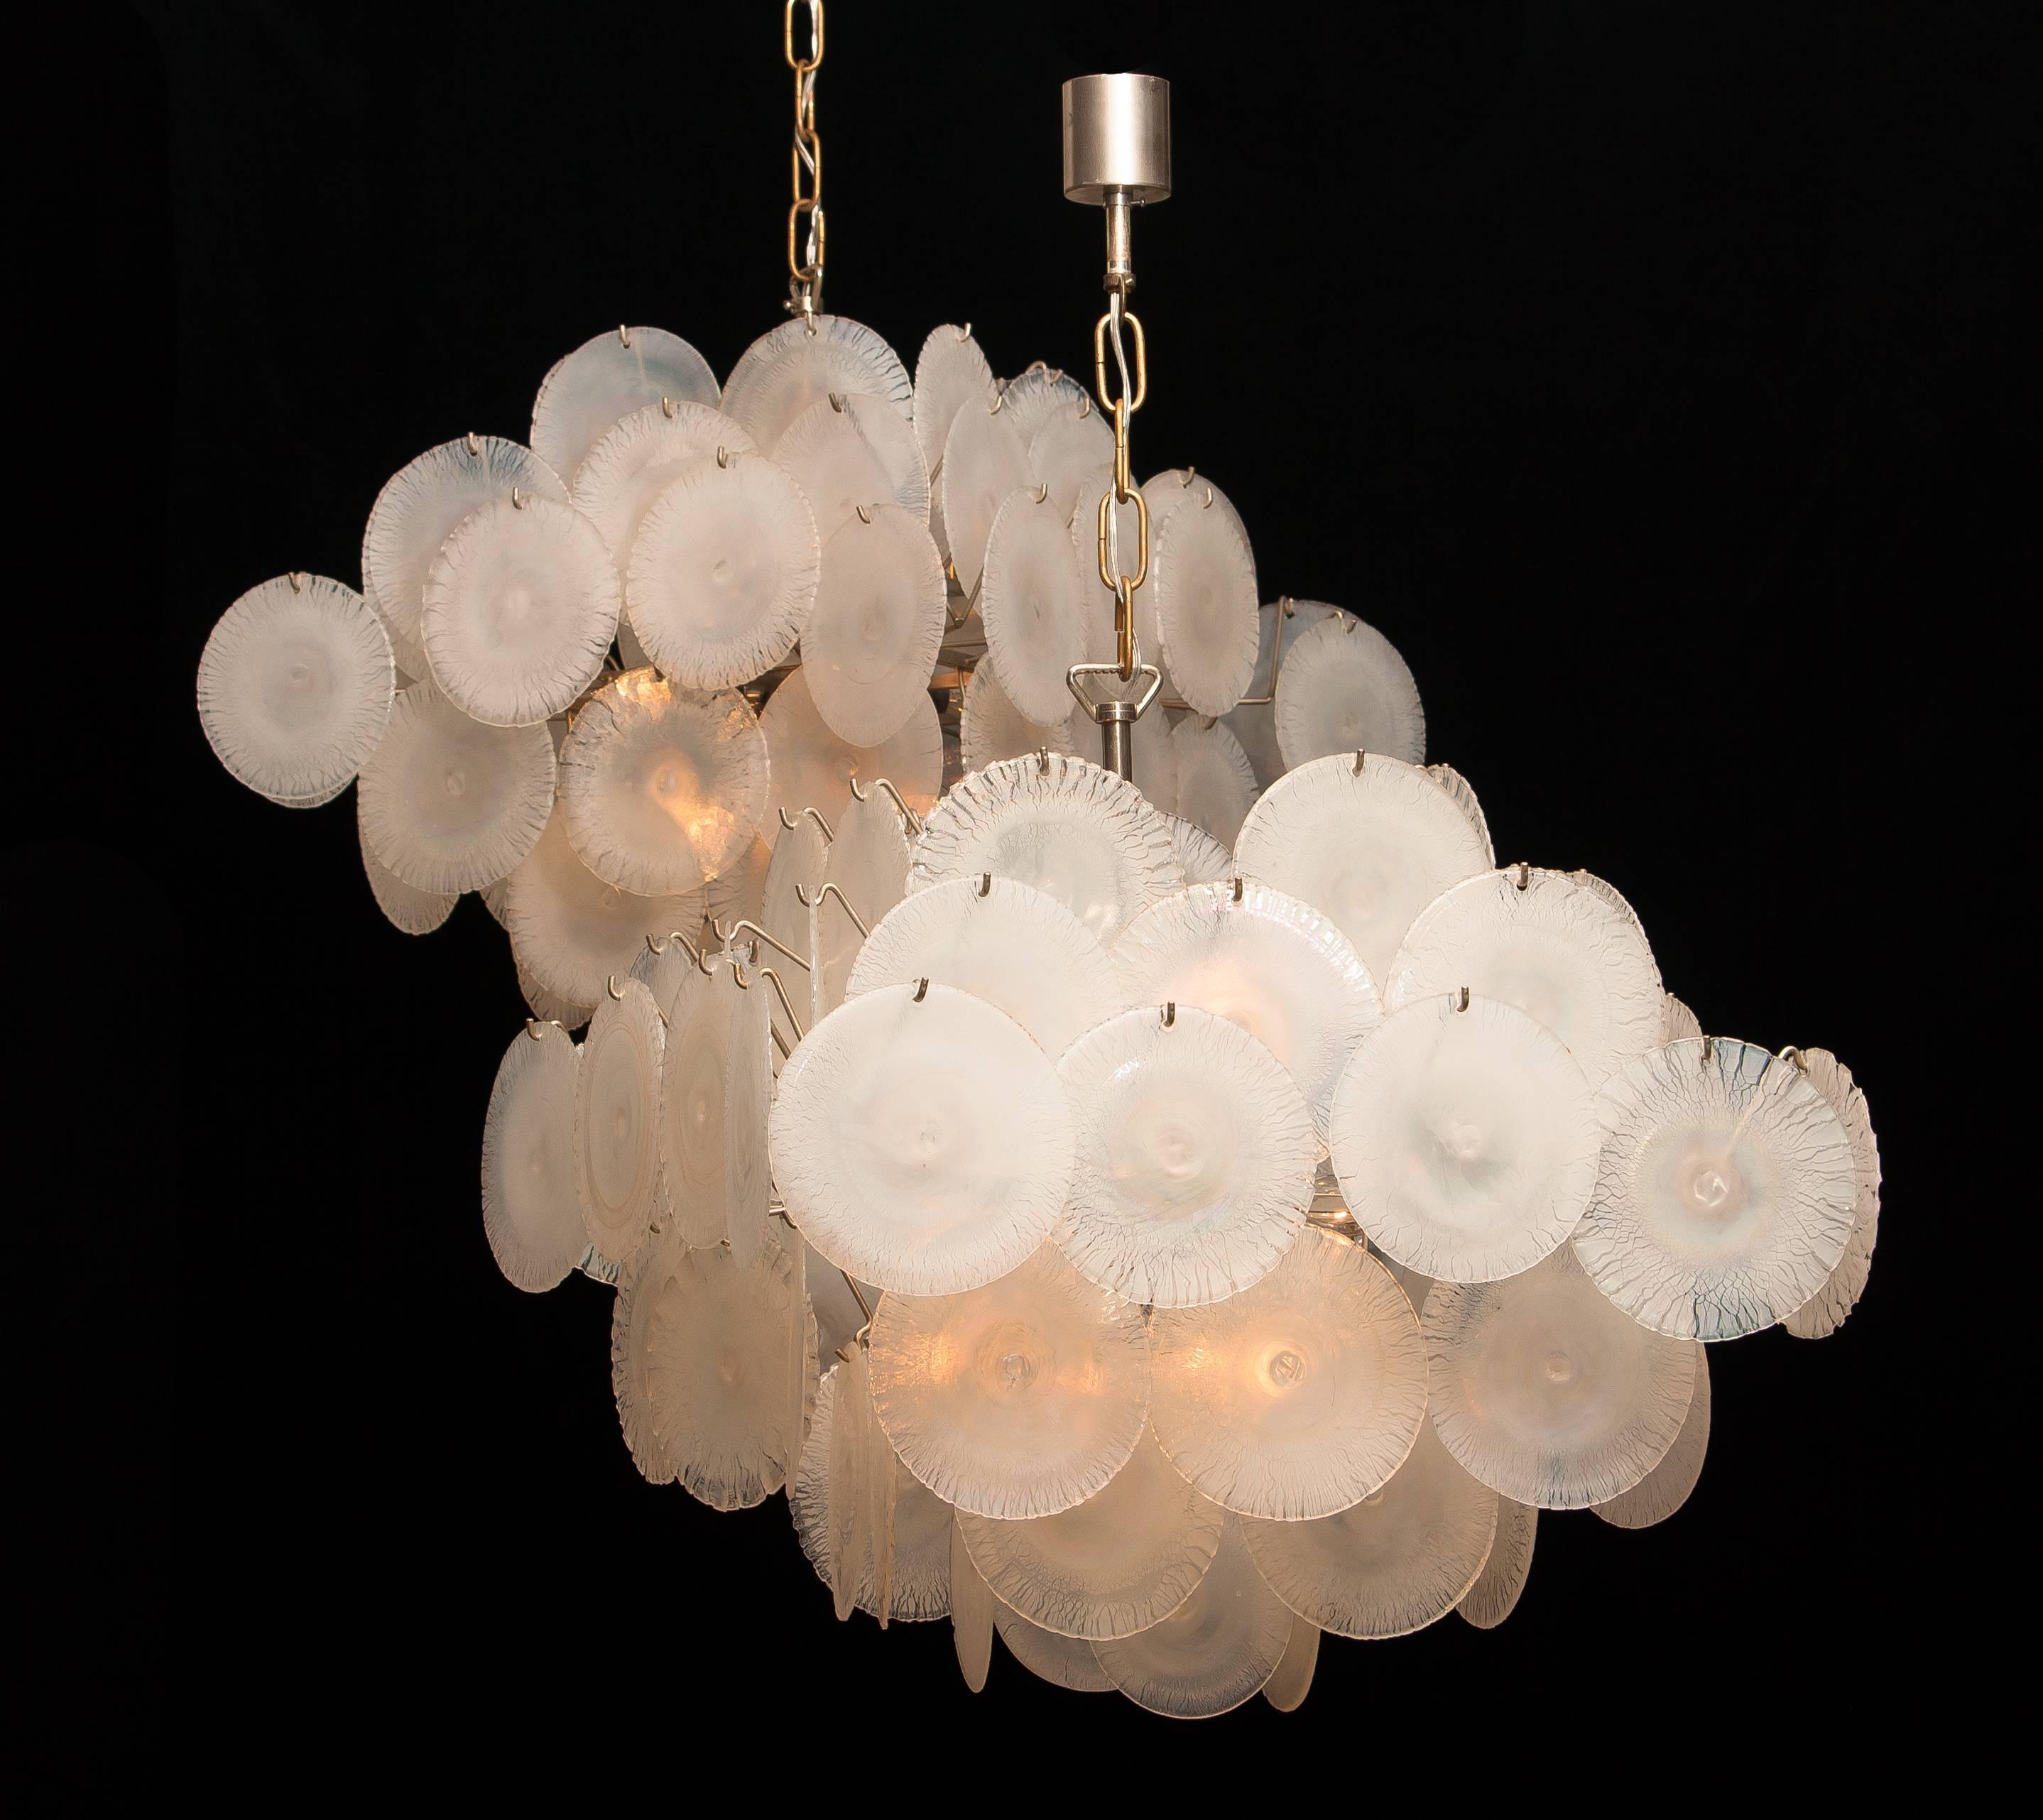 Extremely beautiful set of two Gino Vistosi chandeliers with white / pearl colored handmade Murano crystal discs. 

These Gino Vistosi chandeliers are made in Italy in the 1960s. The chandeliers contains 60 Murano white / pearl colored crystal